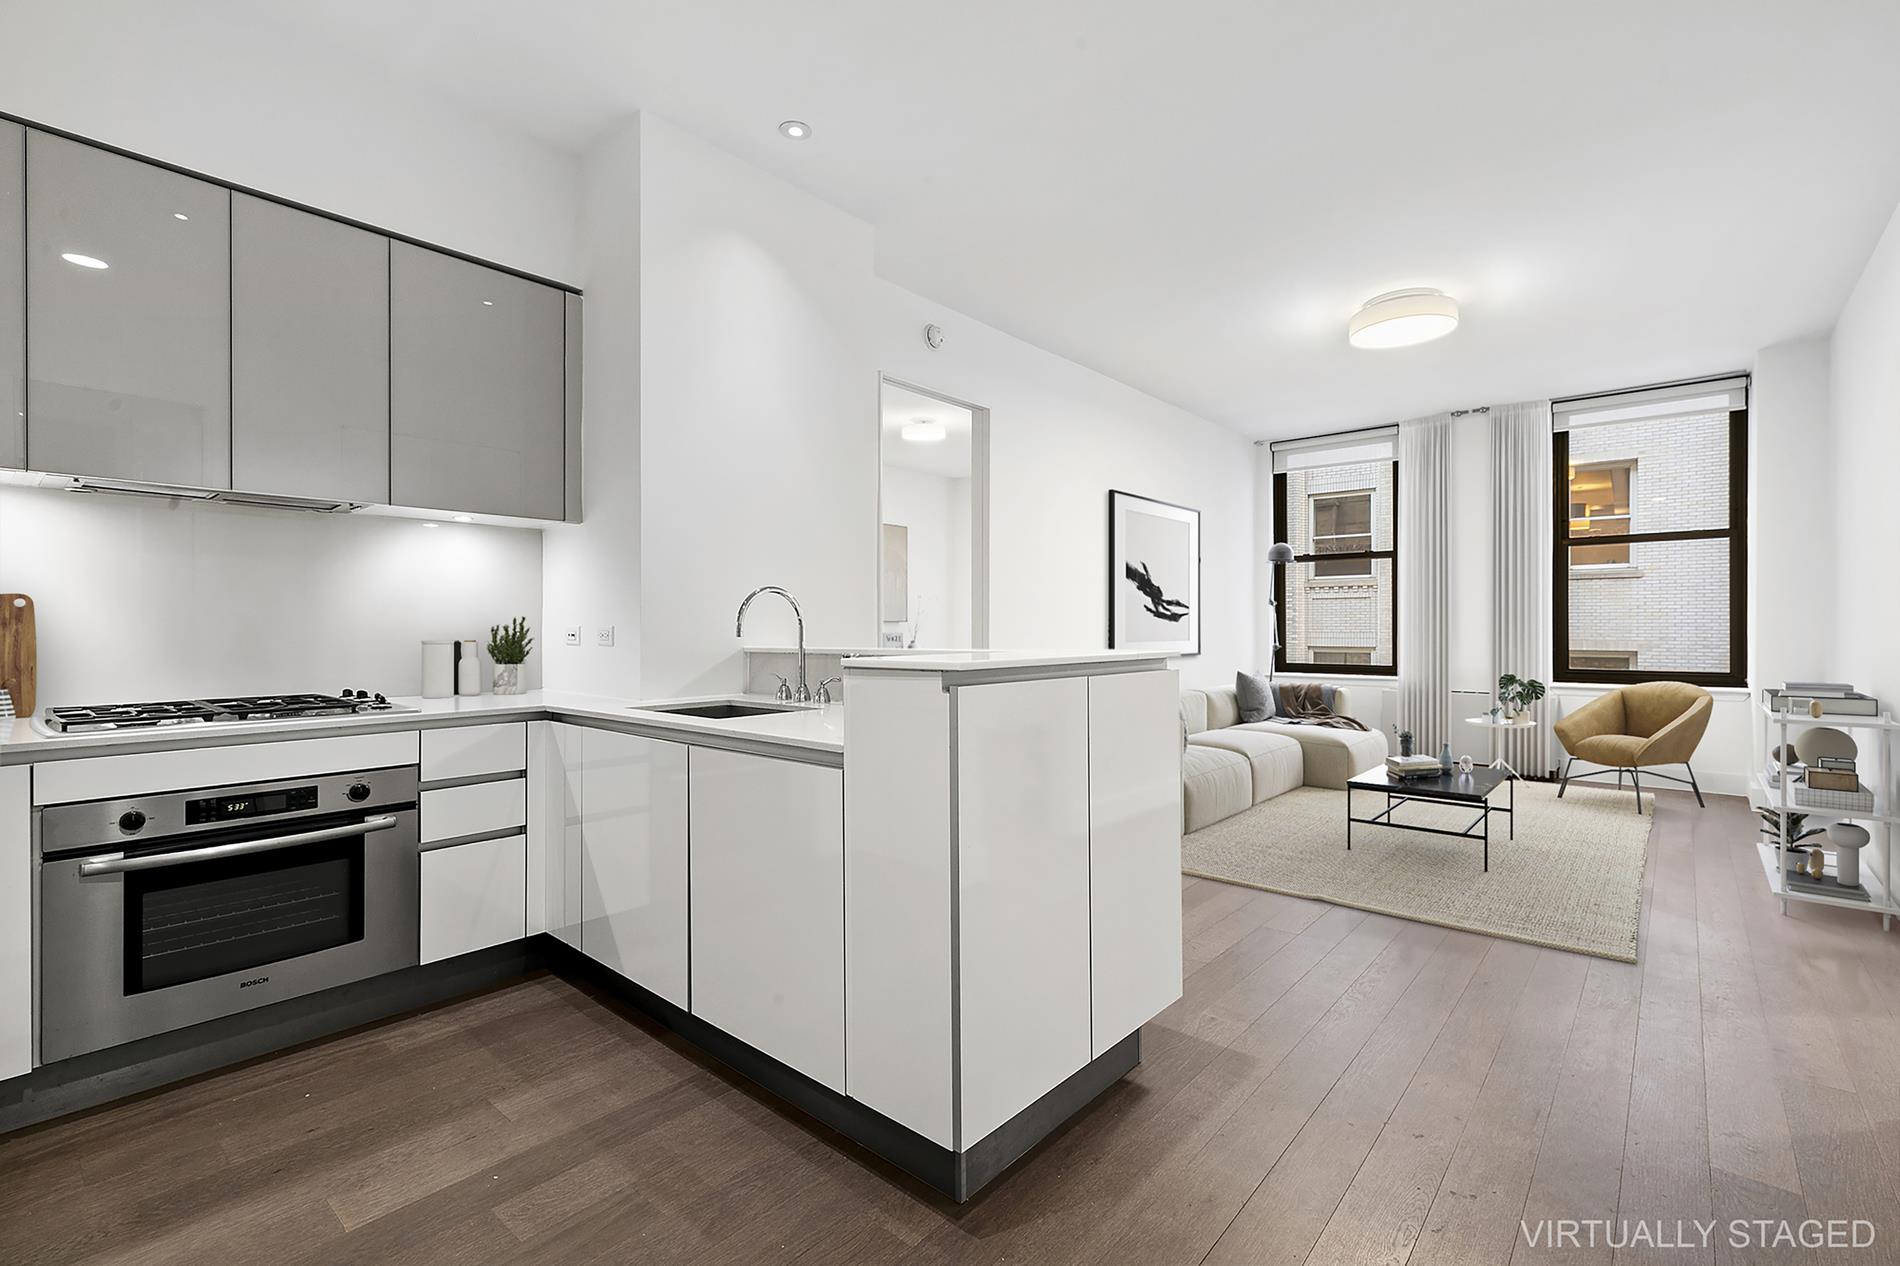 25 Broad Street 20-K, Financial District, Downtown, NYC - 2 Bedrooms  
2 Bathrooms  
3 Rooms - 